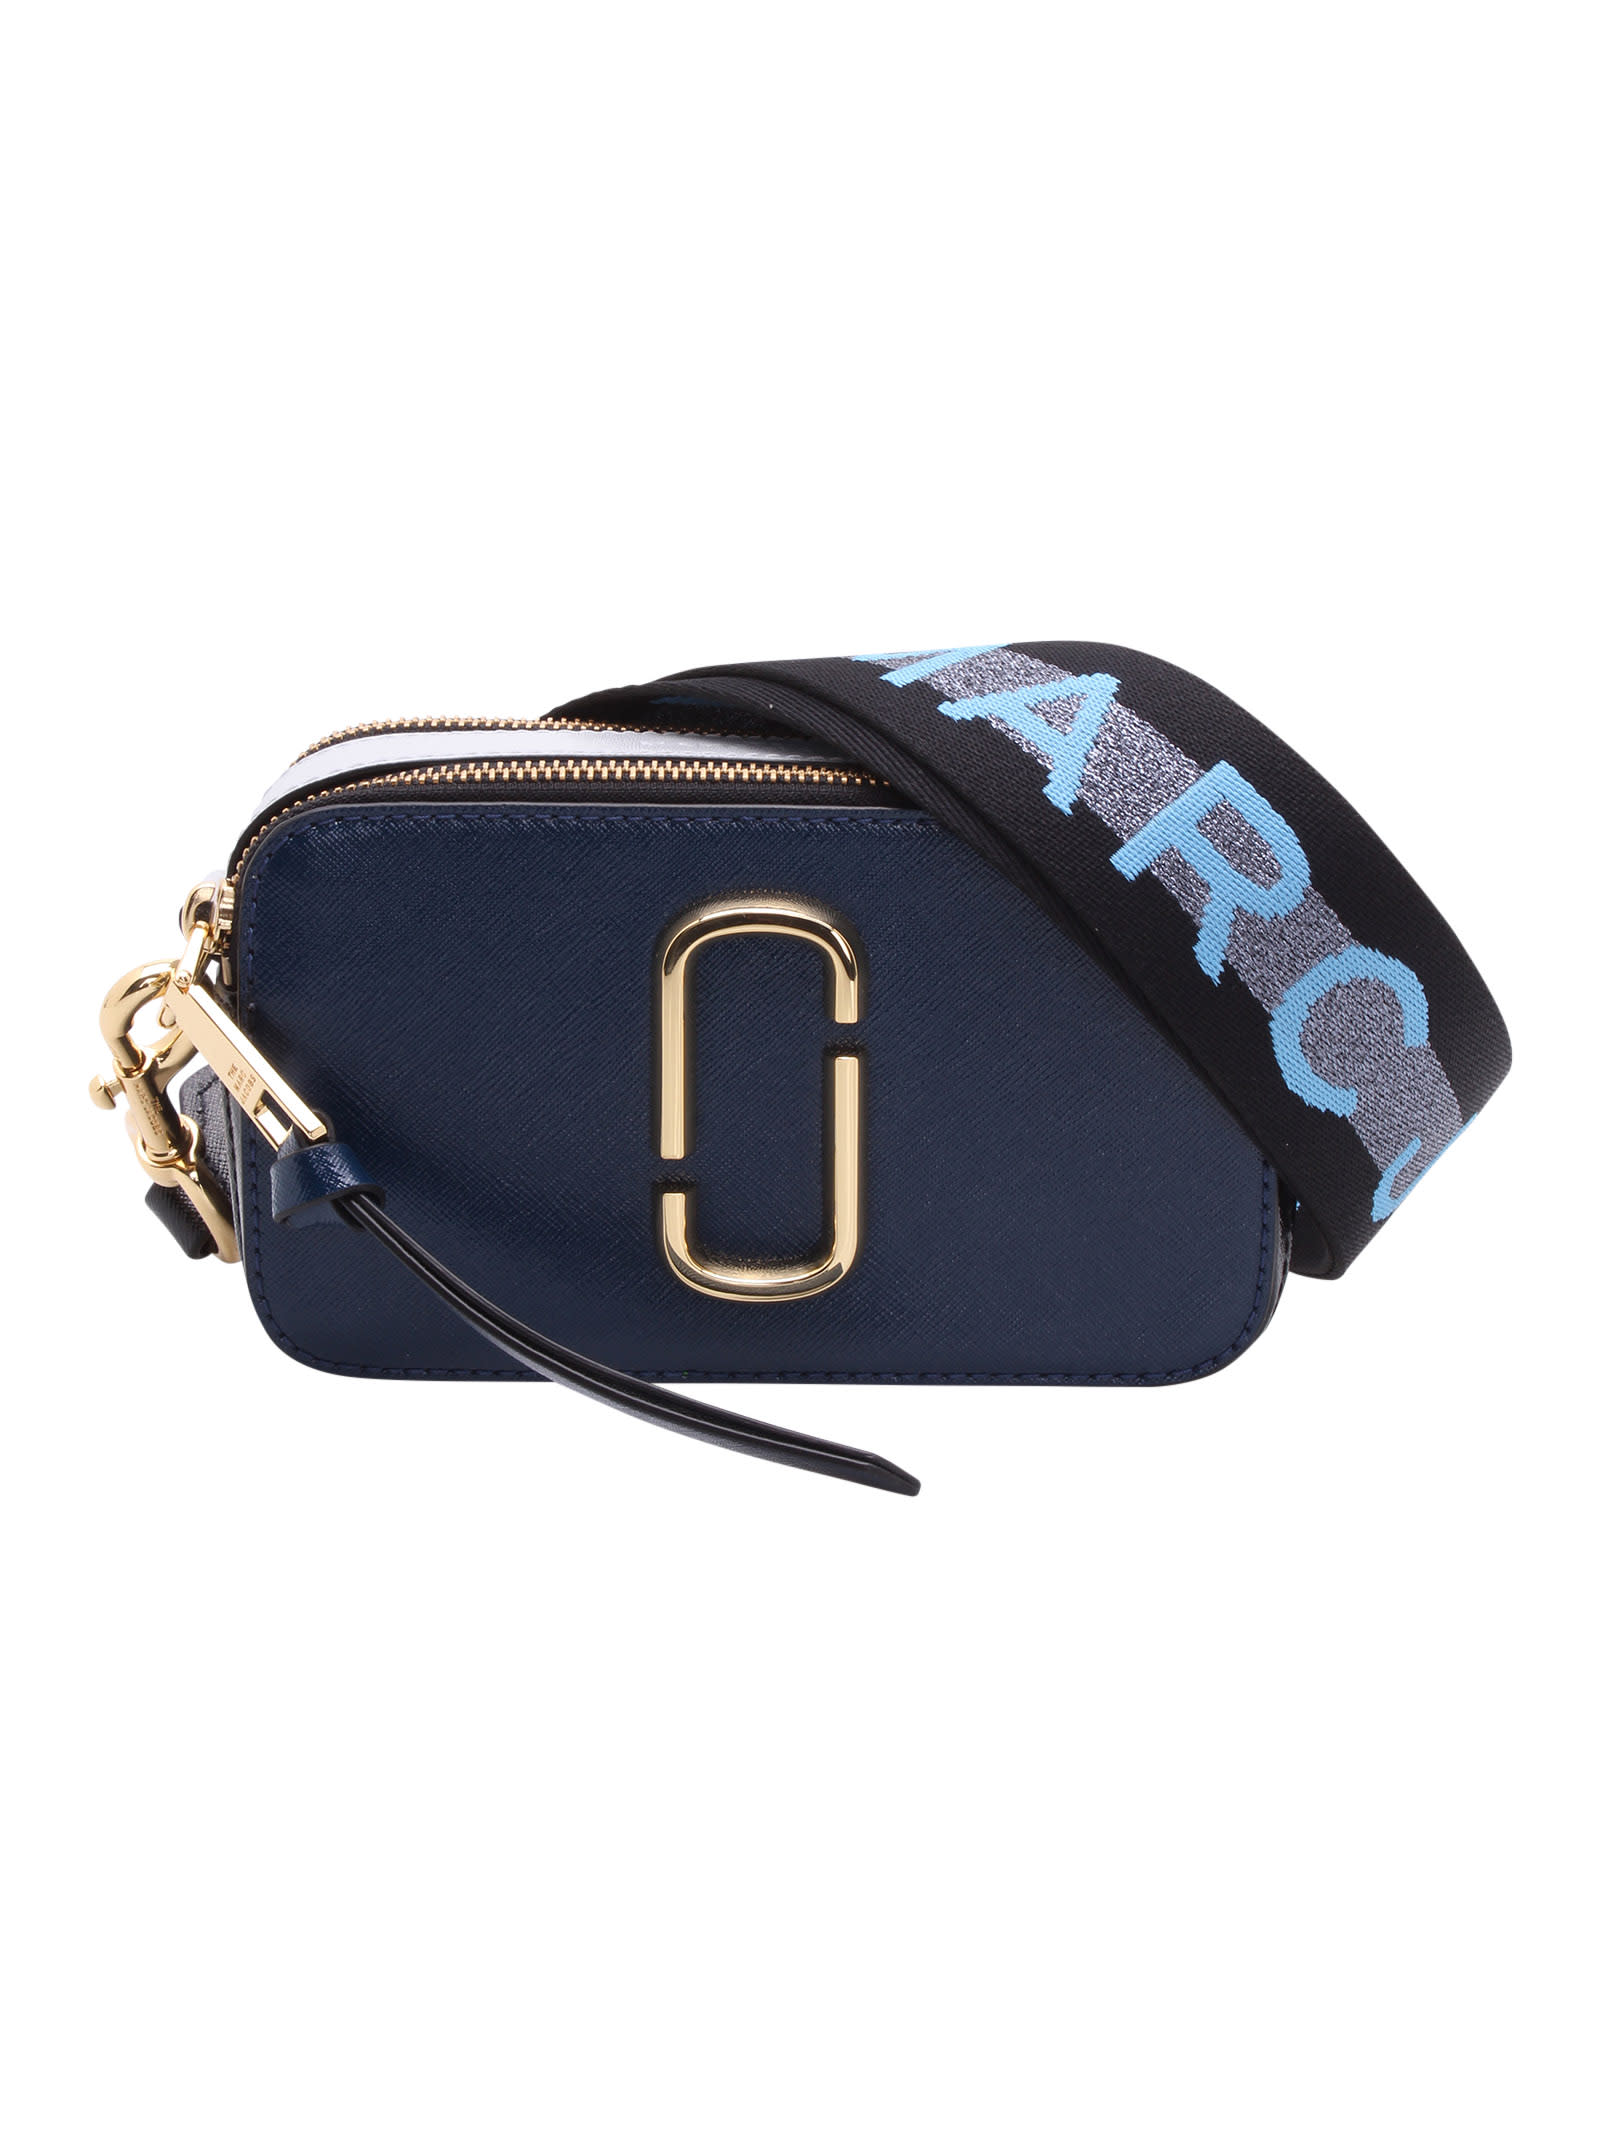 Marc Jacobs Snapshot Leather Shoulder Bag In New Blue Sea Multi | ModeSens